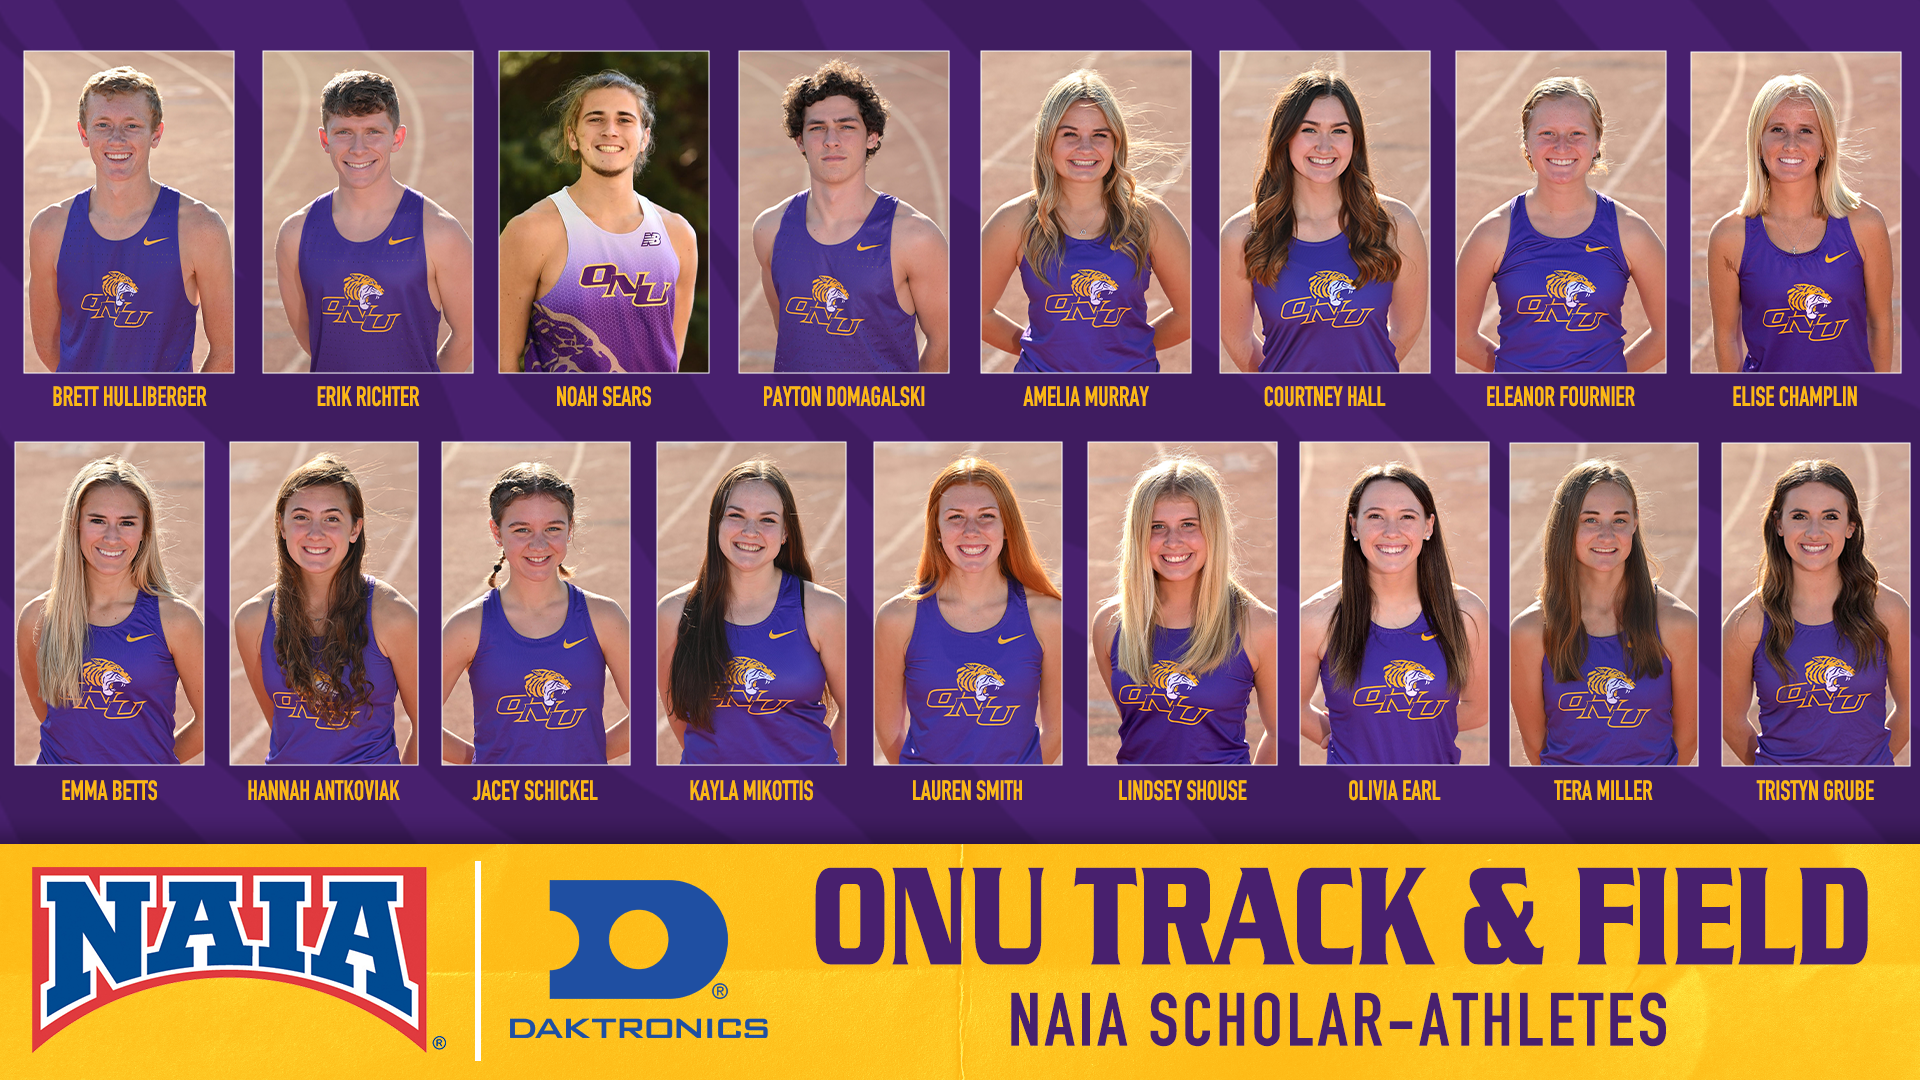 ONU TRACK &amp; FIELD LANDS 17 ON NAIA SCHOLAR-ATHLETE HONOR ROLL